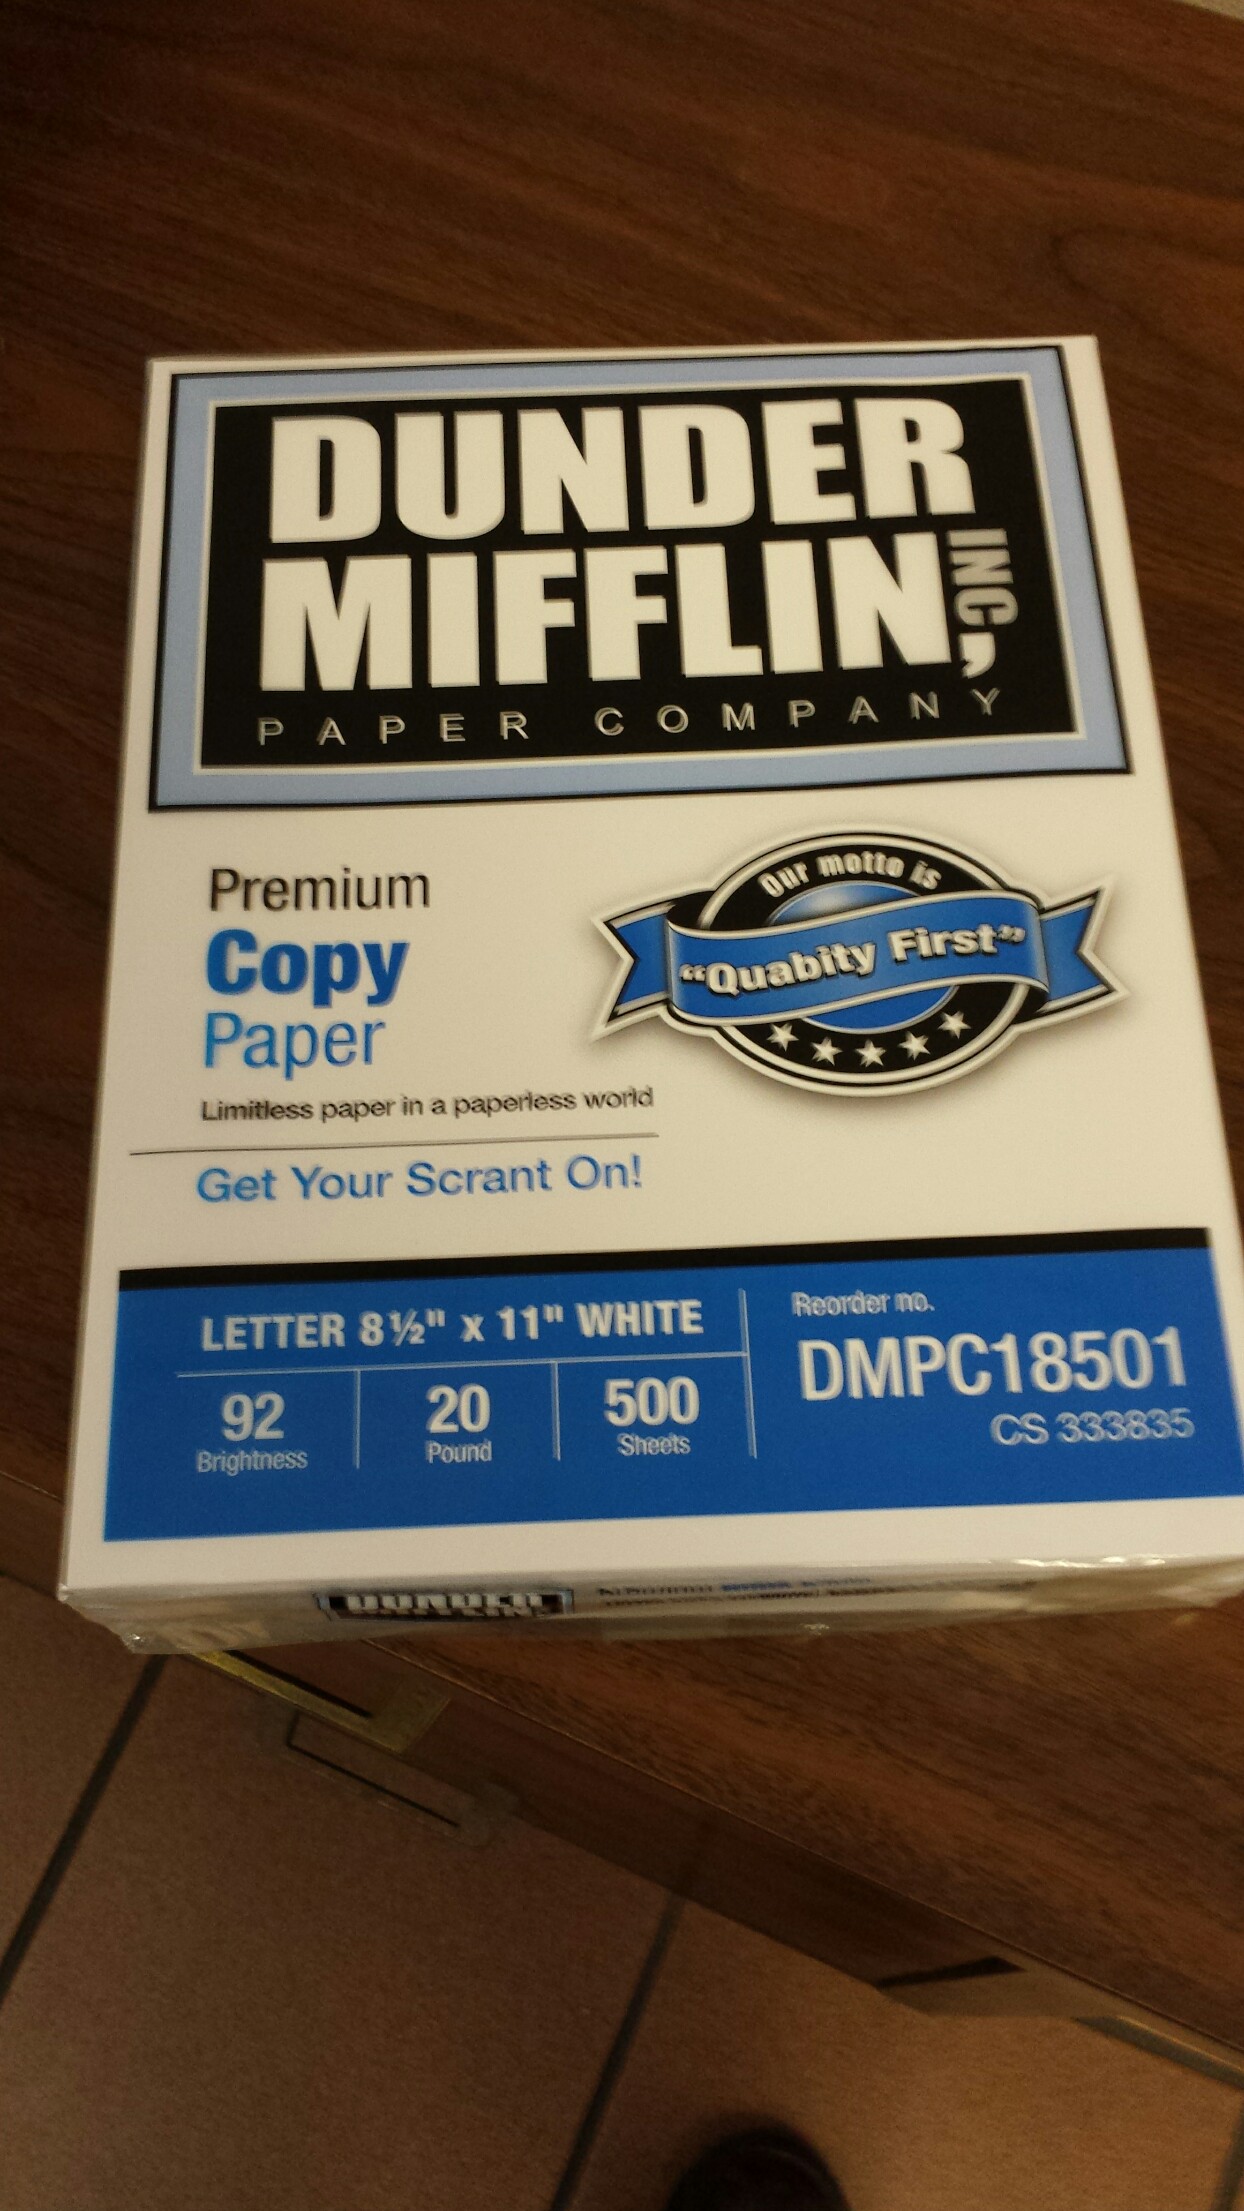 Noticed something familiar about the paper at work...